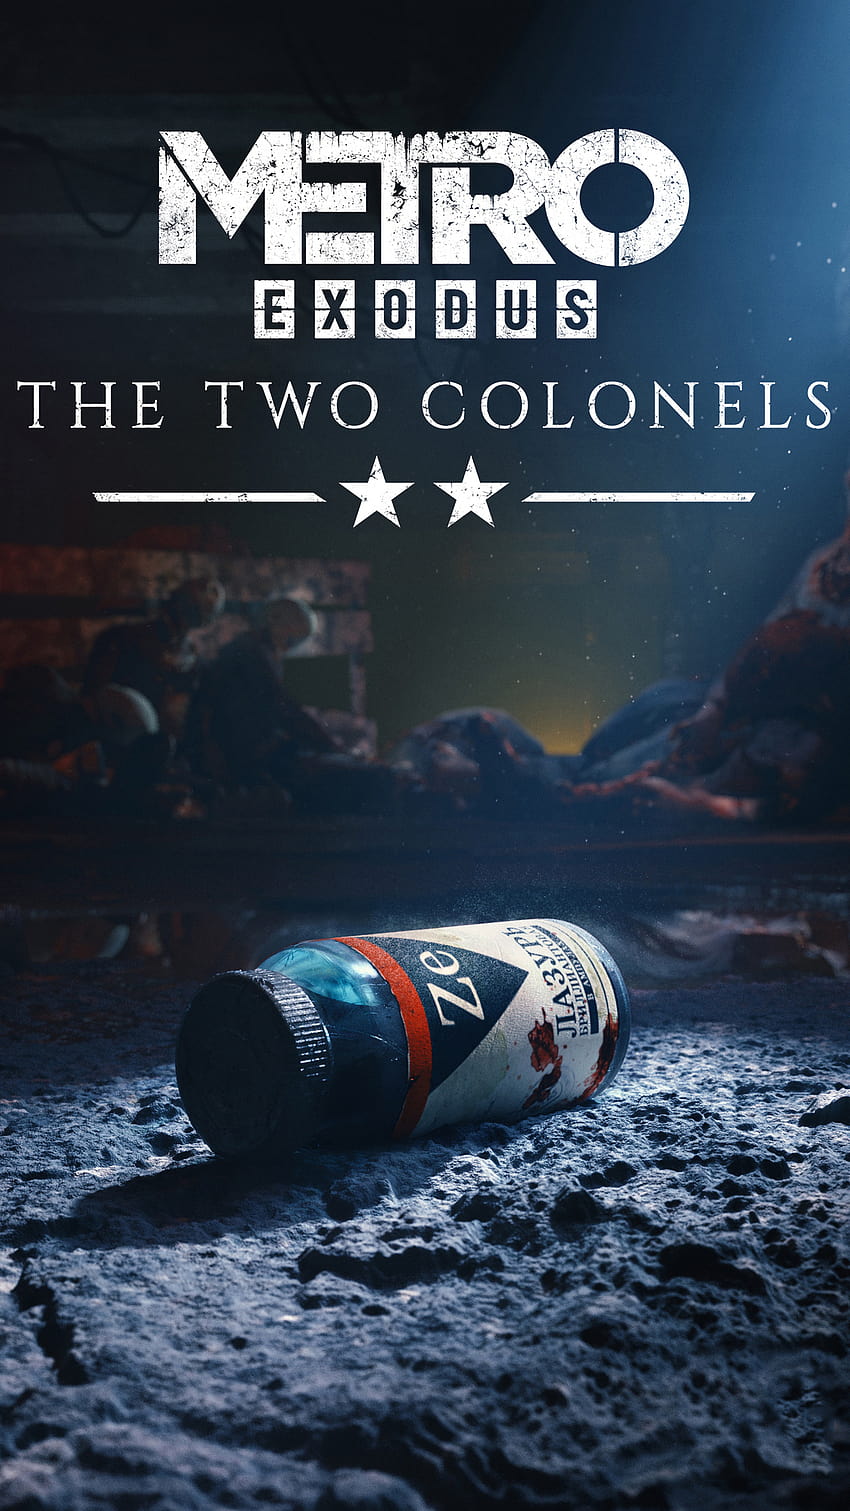 1080x1920 Metro Exodus The Two Colonels Iphone 7,6s,6 Plus, Pixel xl ,One Plus 3,3t,5 , Backgrounds, and, iphone metro exodus HD phone wallpaper